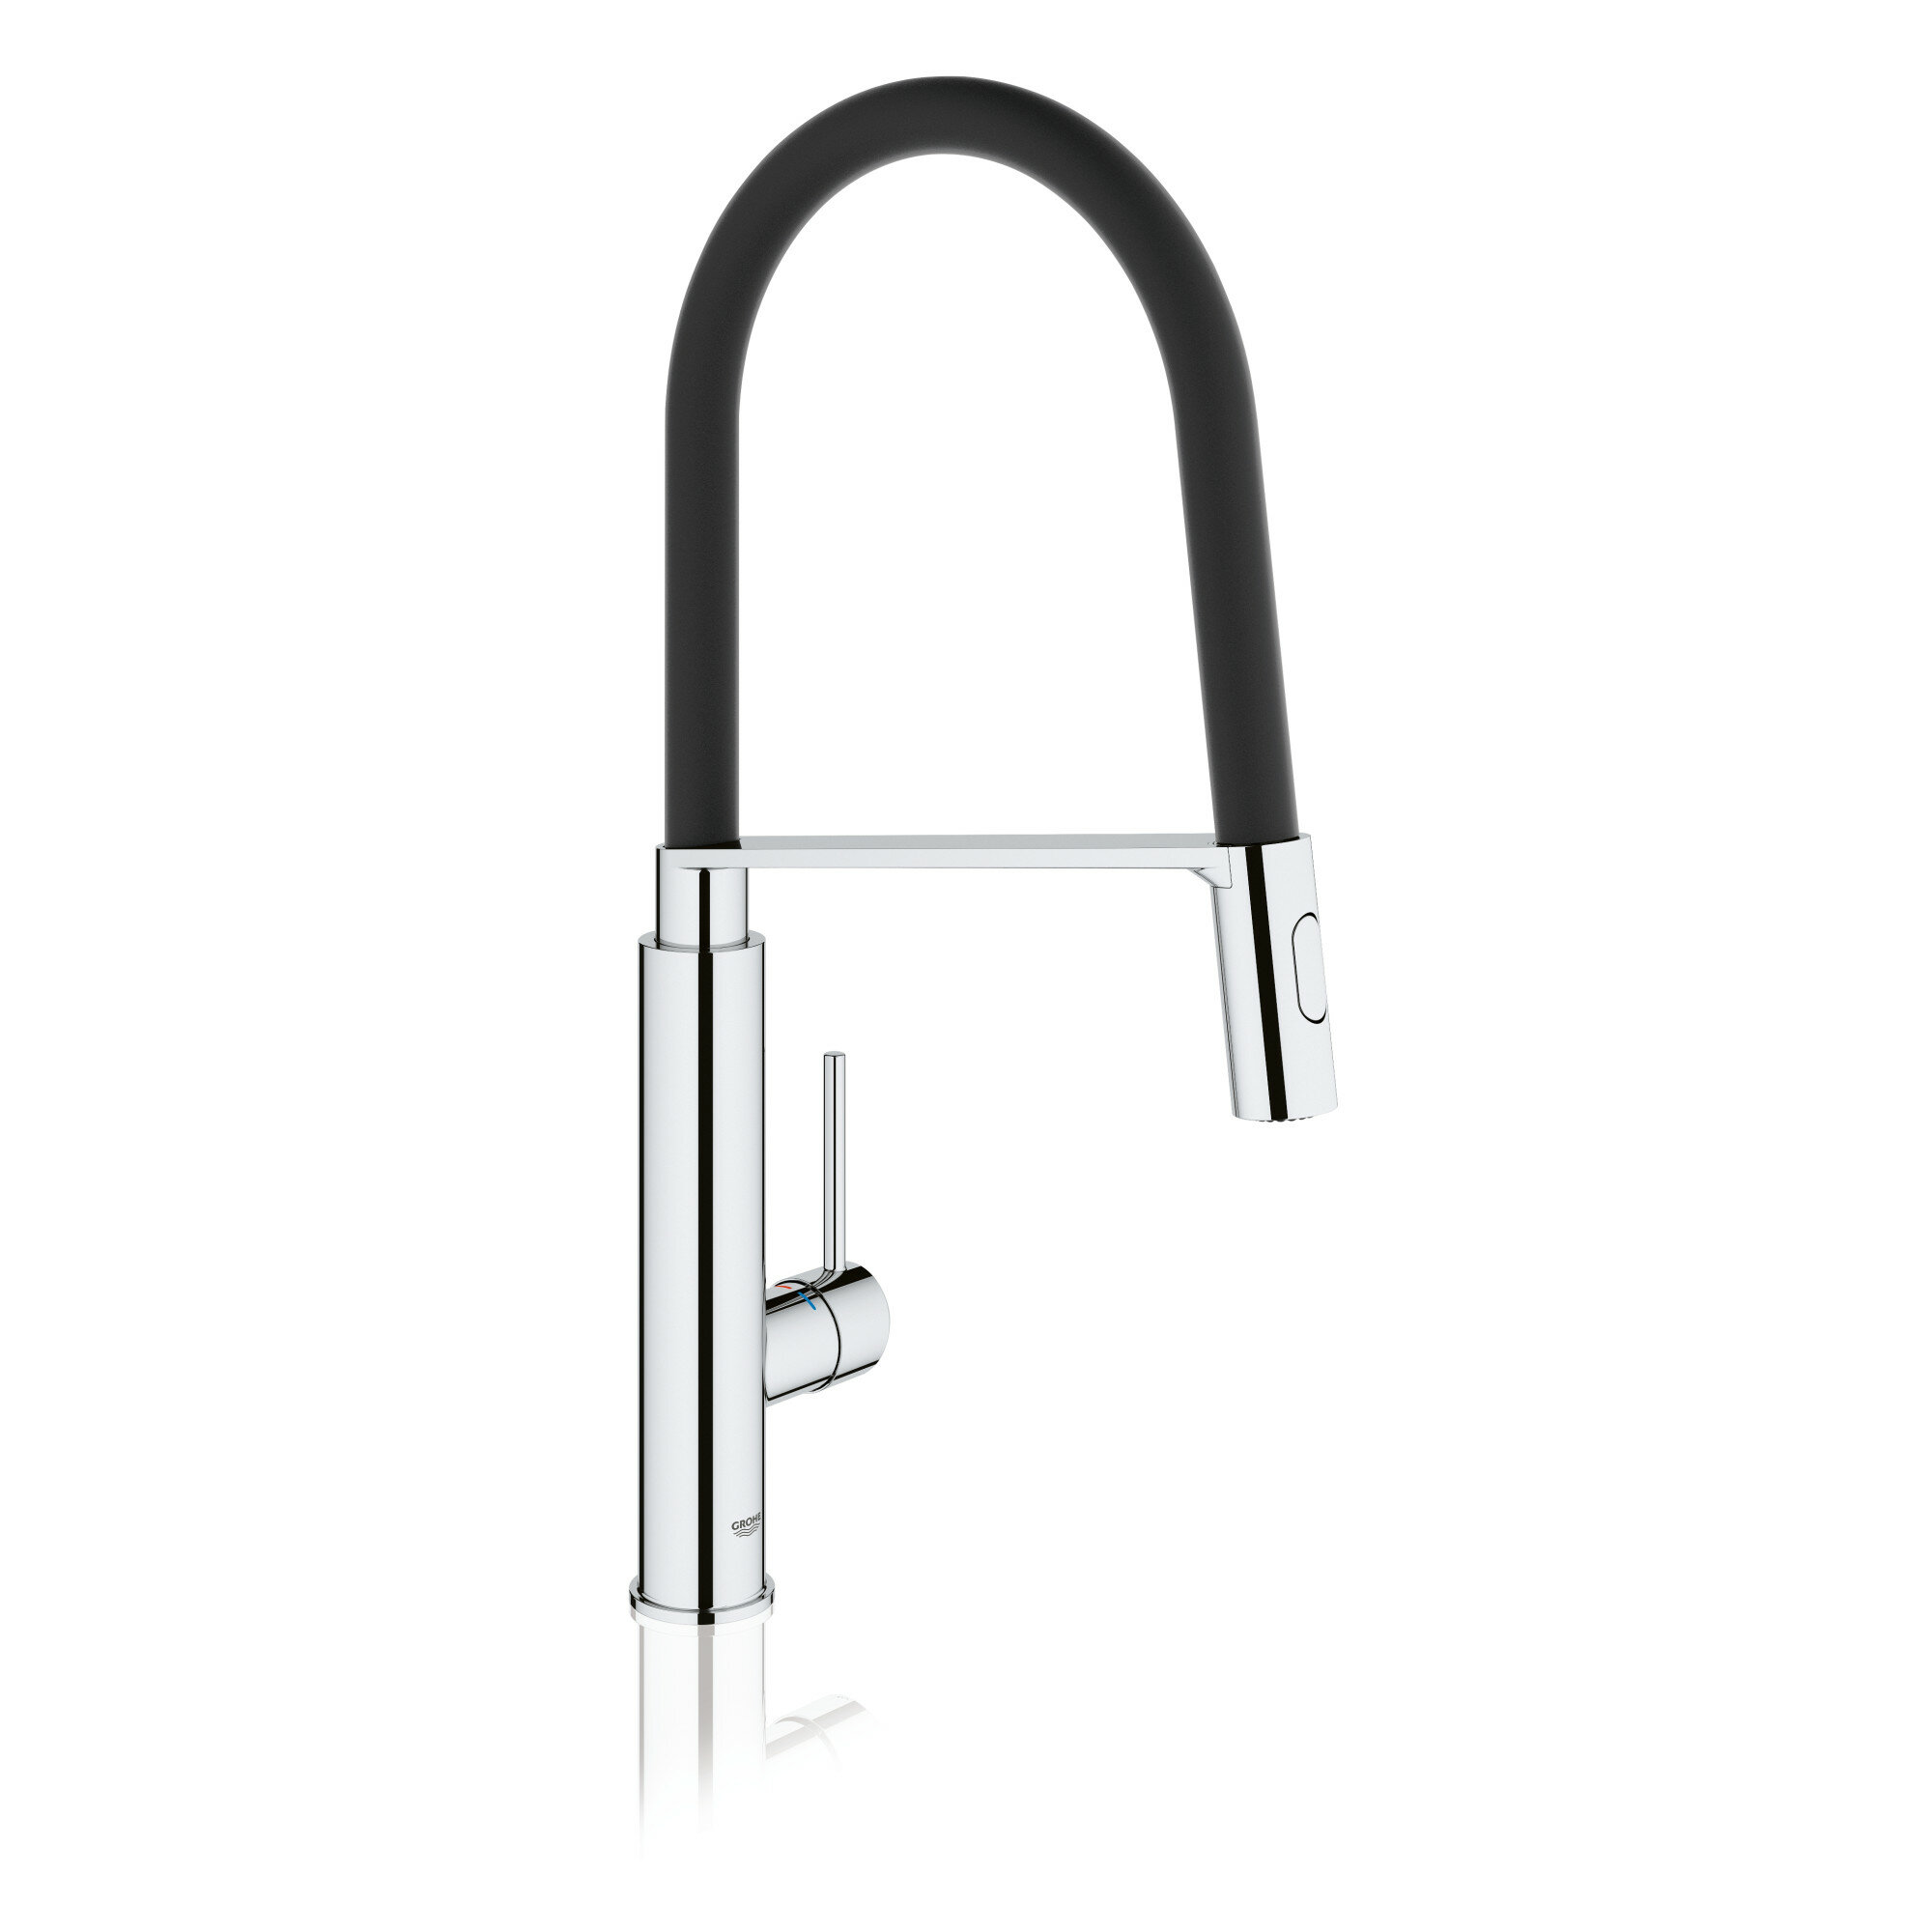 Grohe Concetto Single Handle Kitchen Faucet With Silkmove Reviews Wayfairca